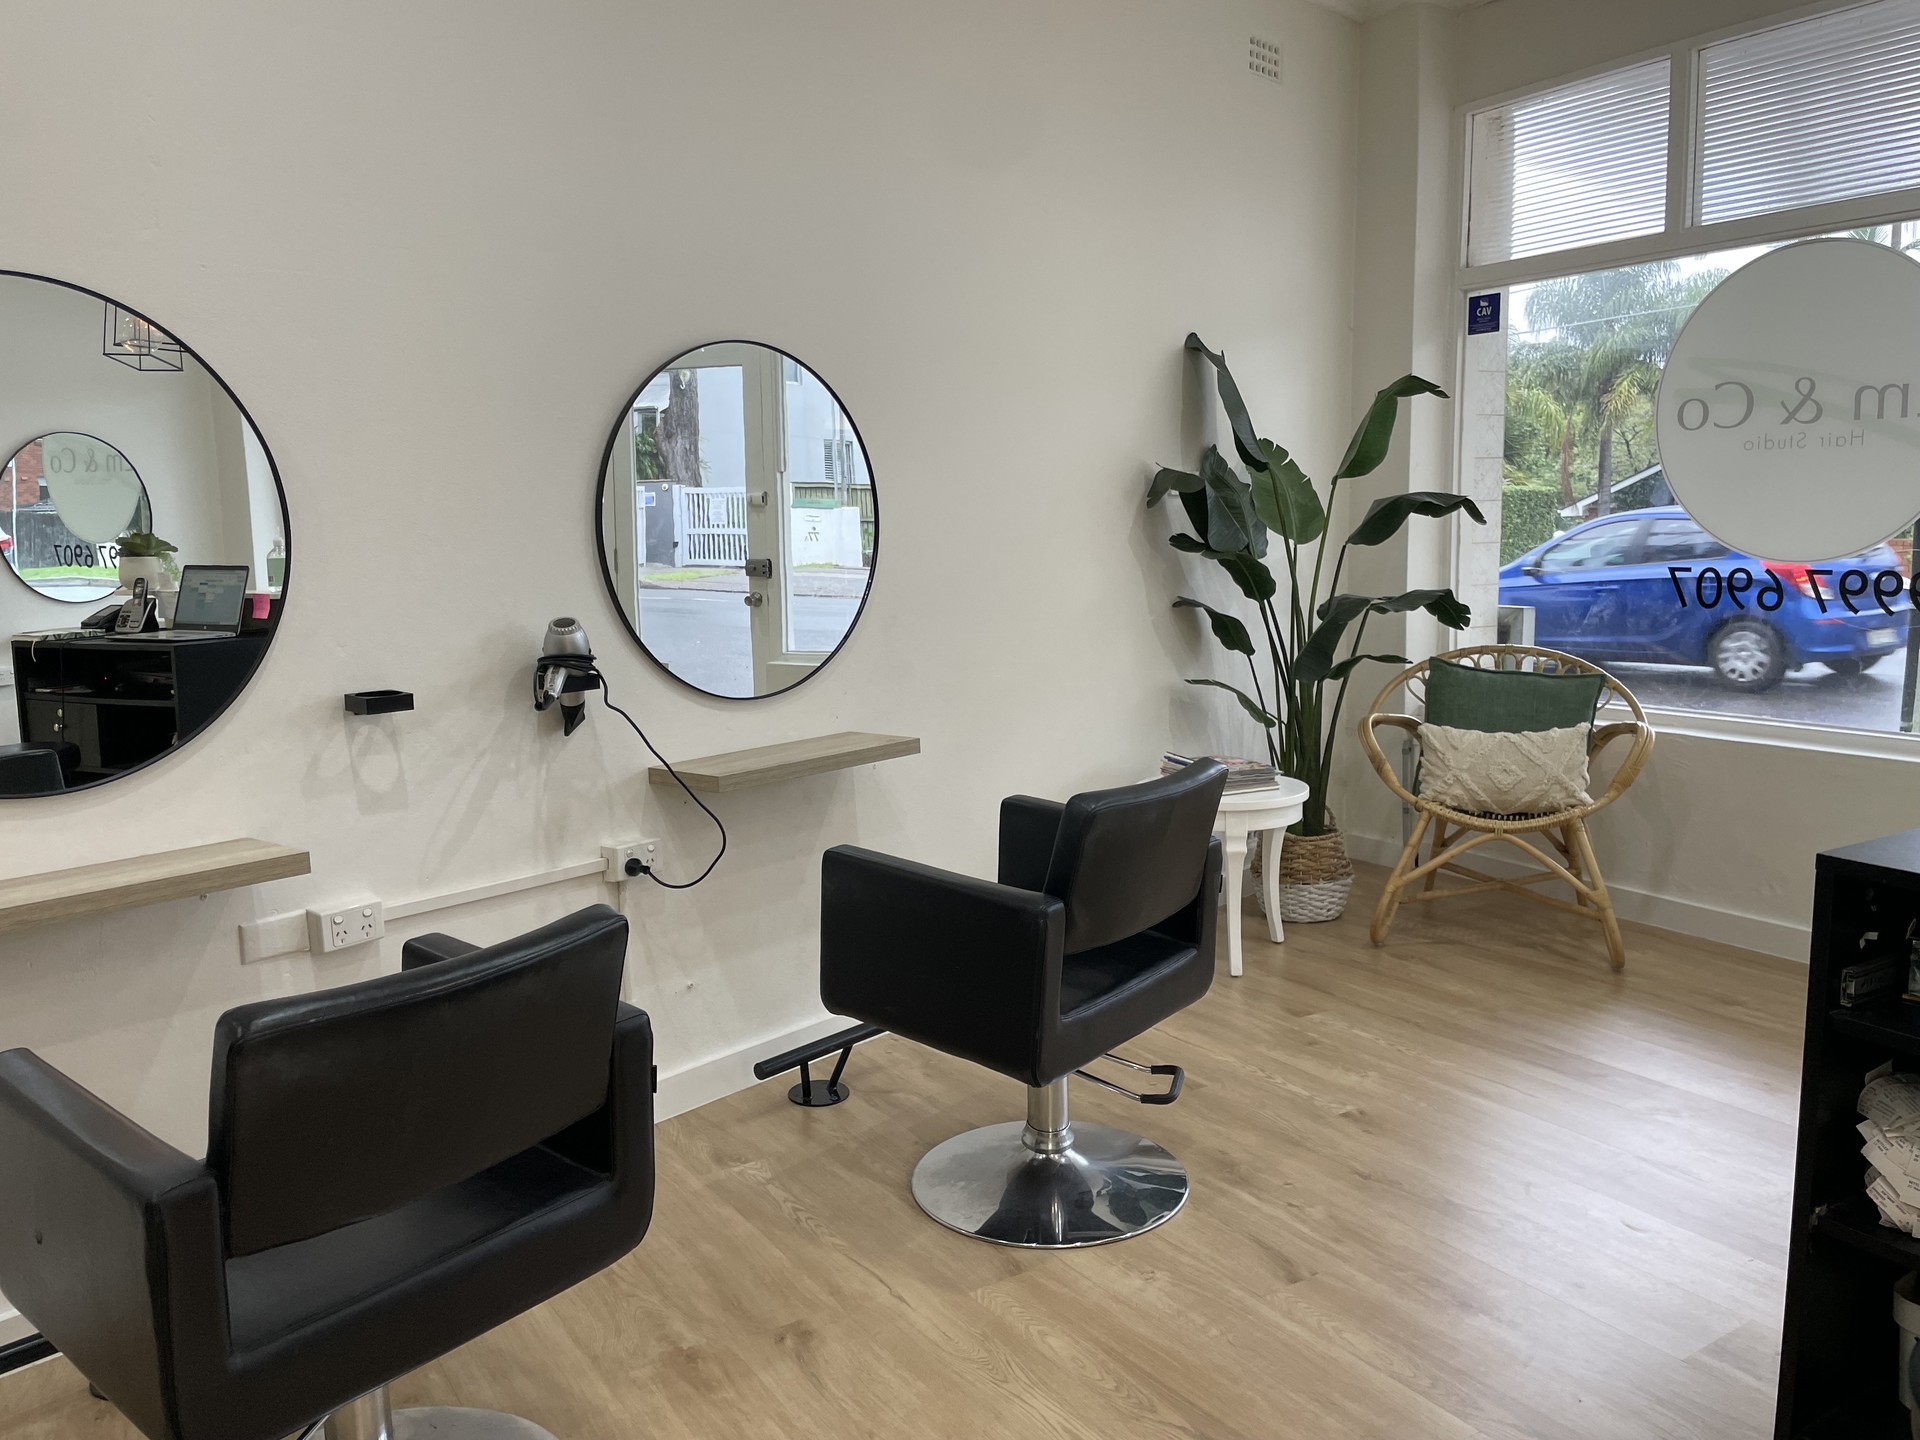 Impressive Hair Salon with New Shop Fit Out – Newport, NSW